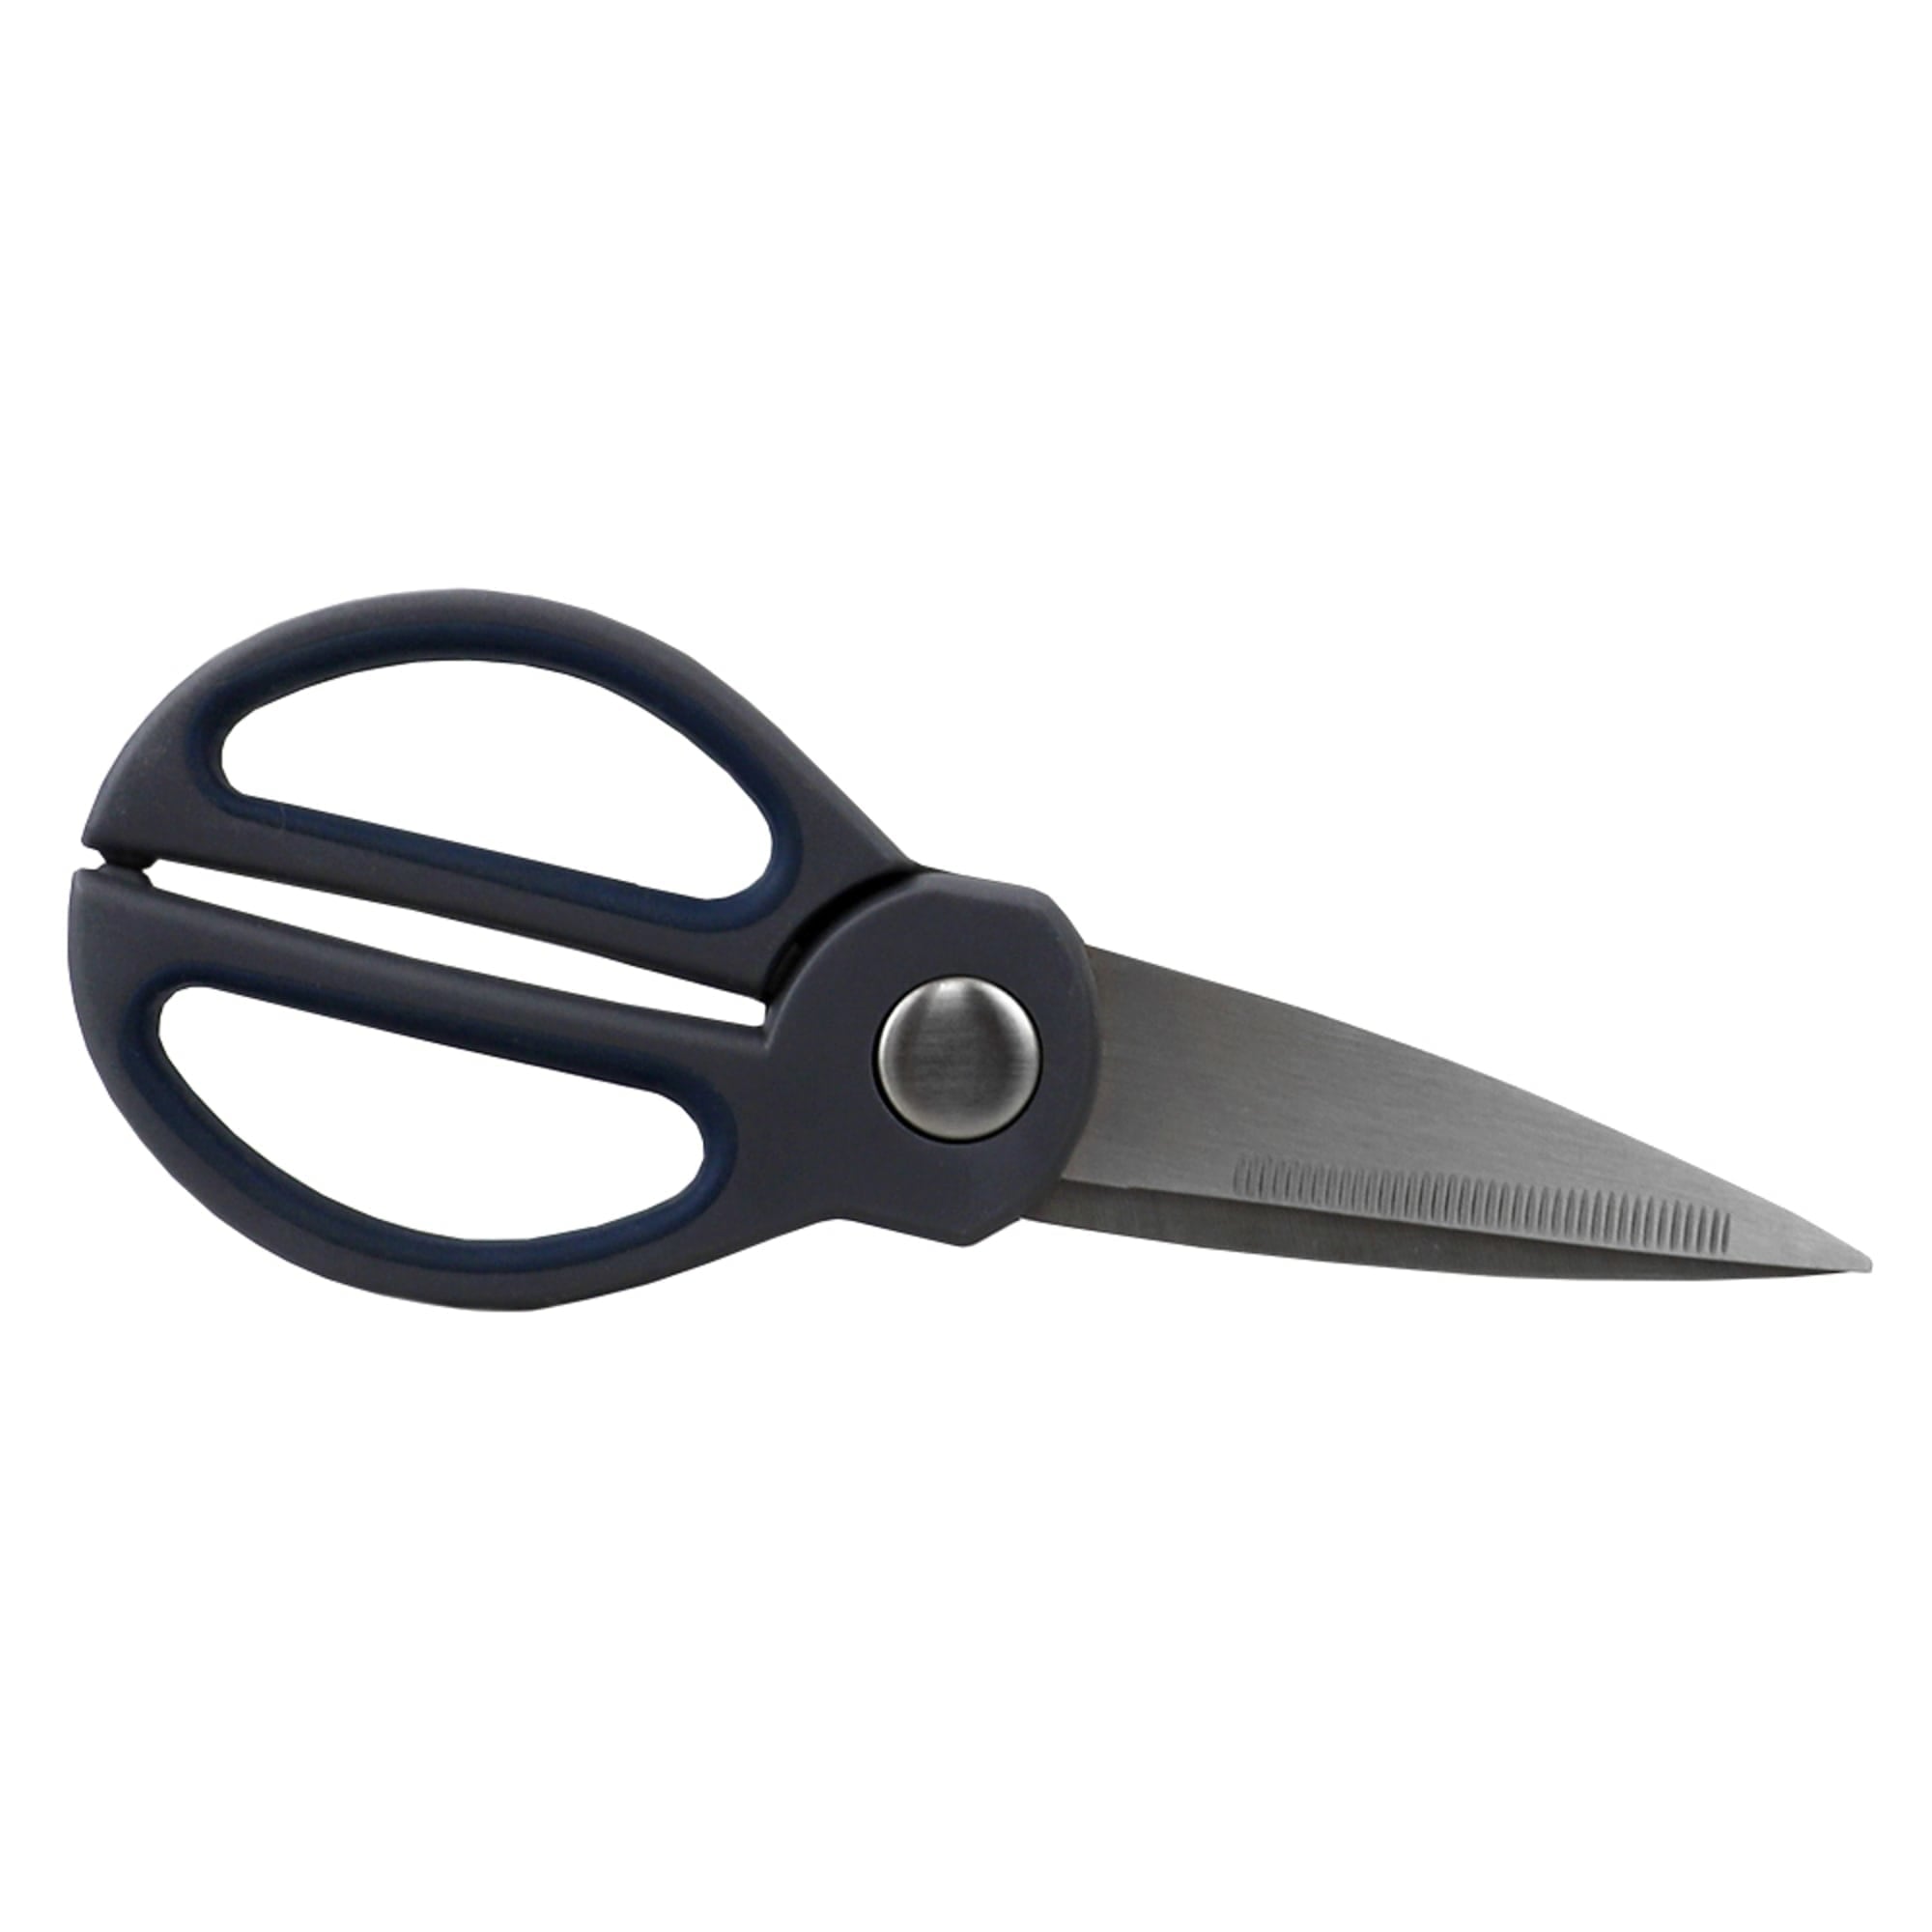 Michael Graves Comfortable Grip All Purpose Stainless Steel Kitchen Shears, Grey $3.00 EACH, CASE PACK OF 24